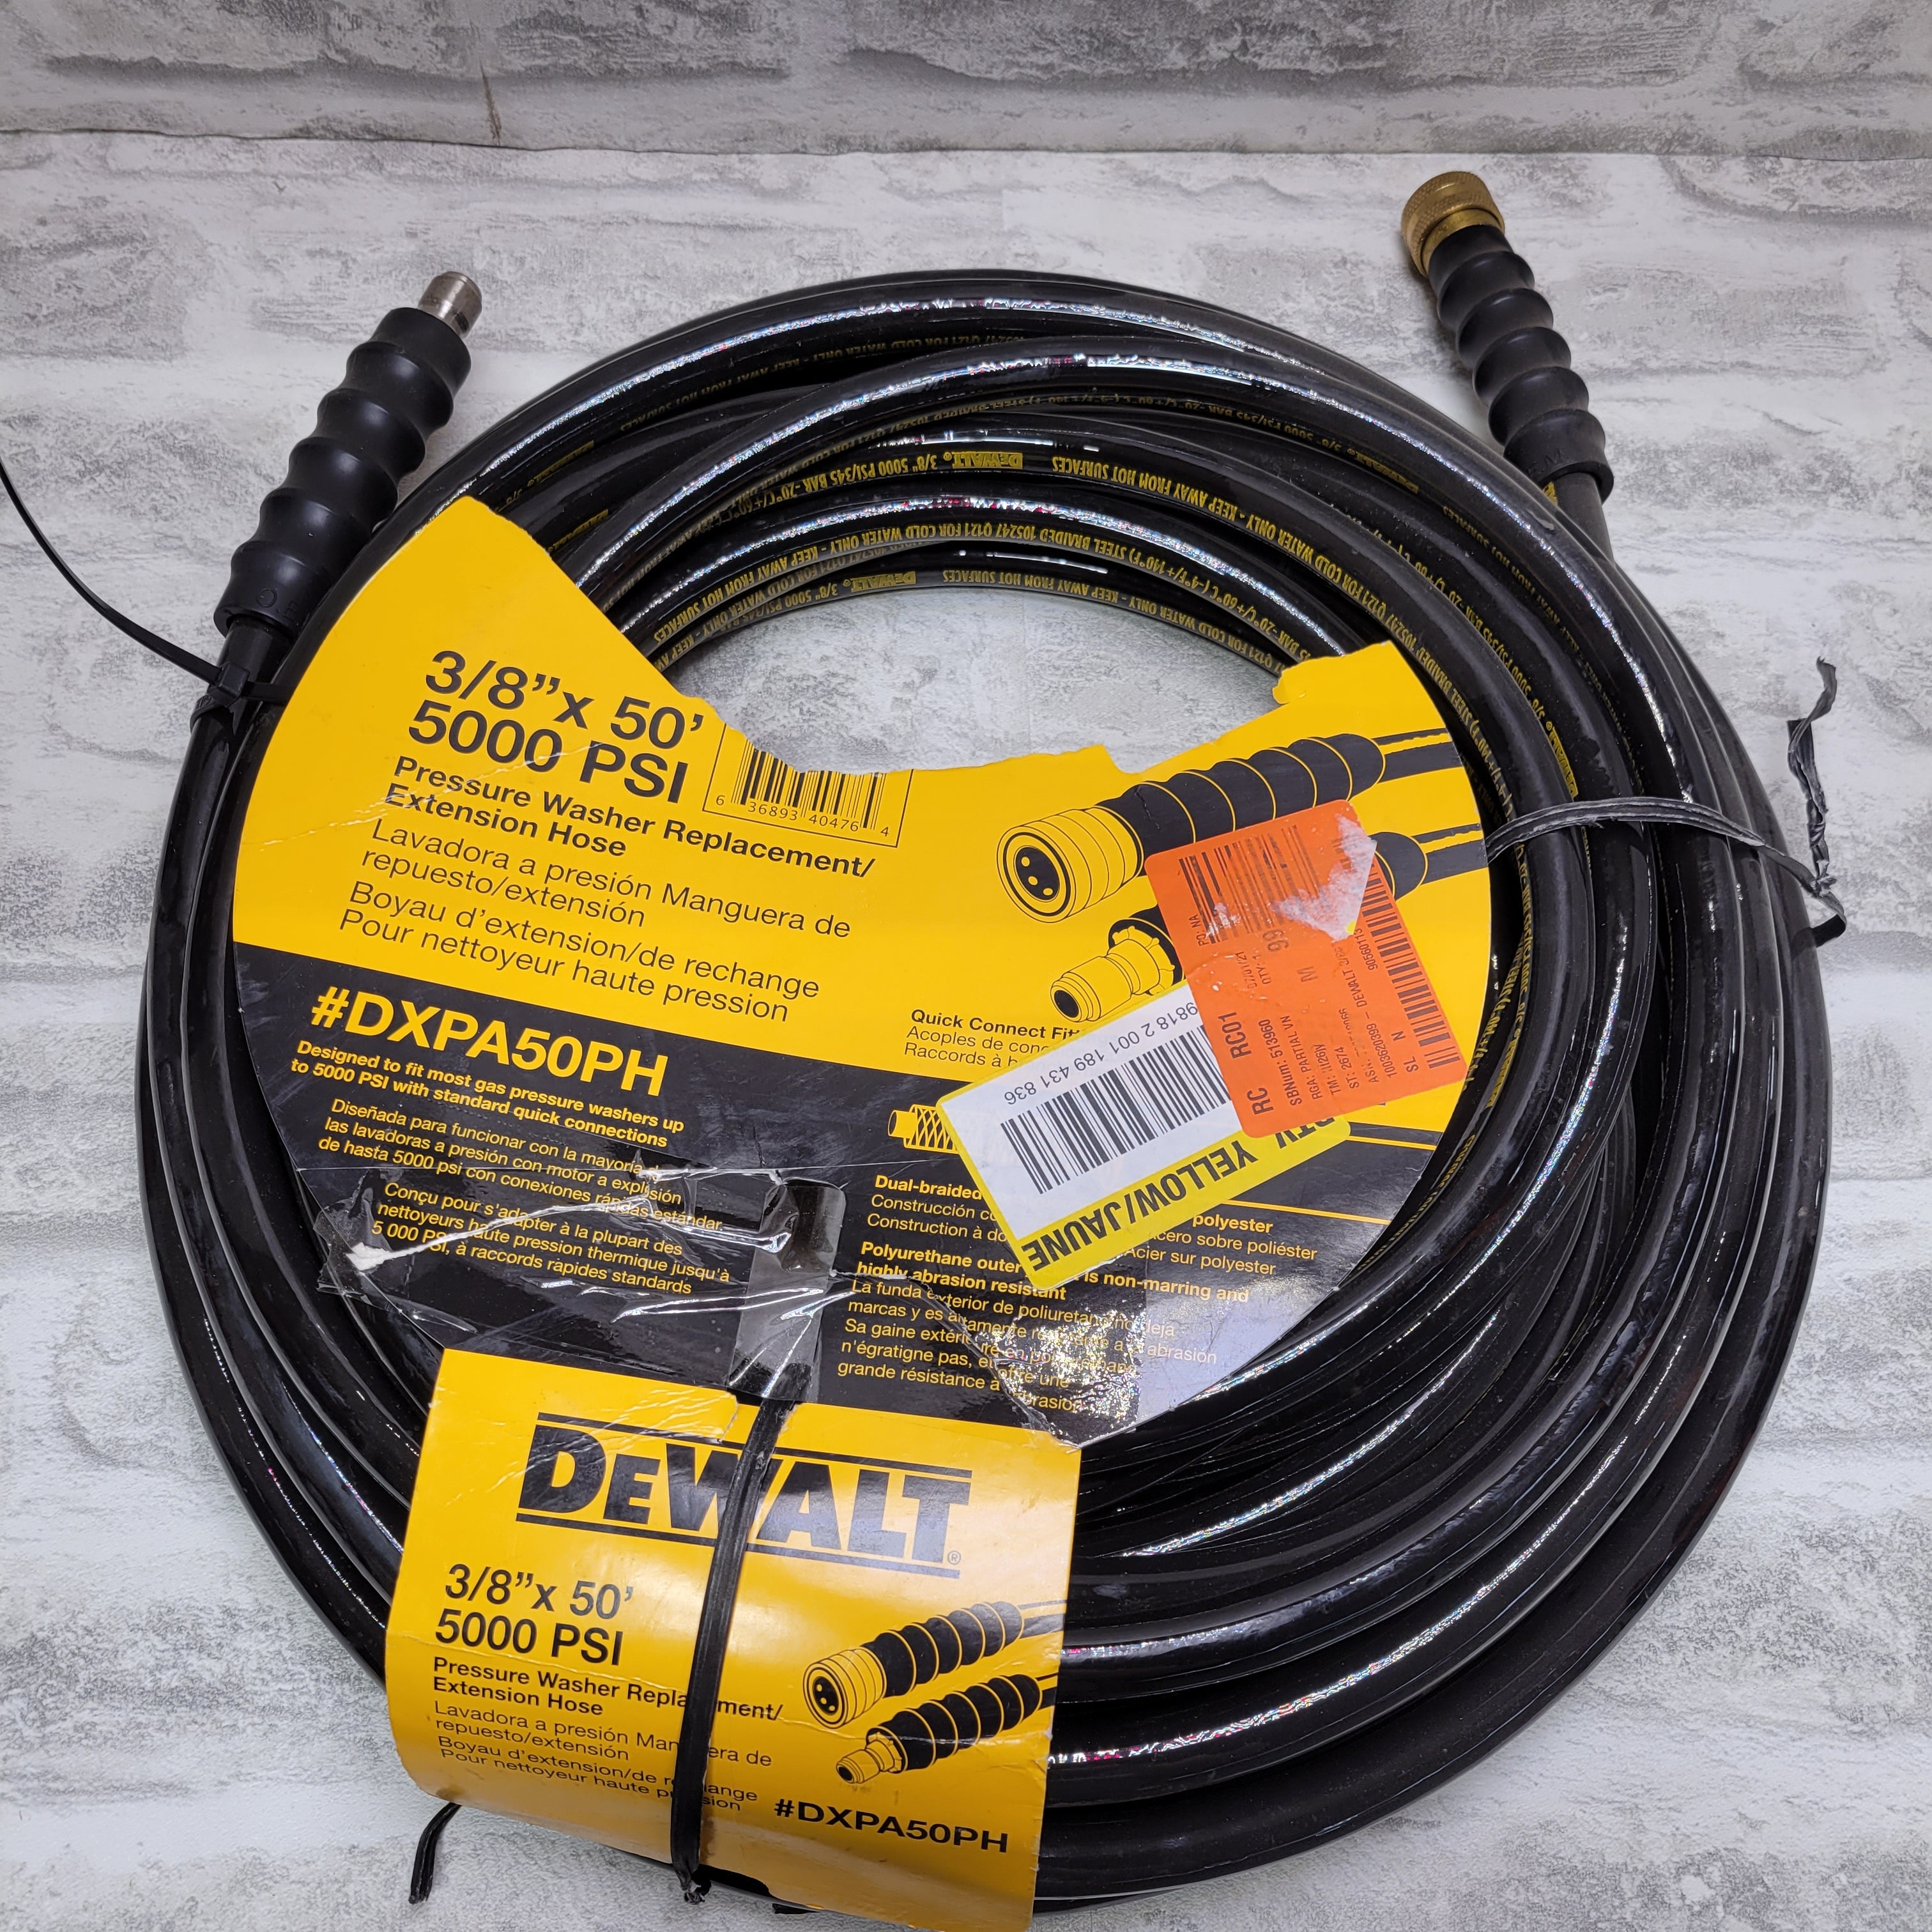 DEWALT 3/8 in. x 50 ft. 5000 PSI Replacement/Extension Hose for